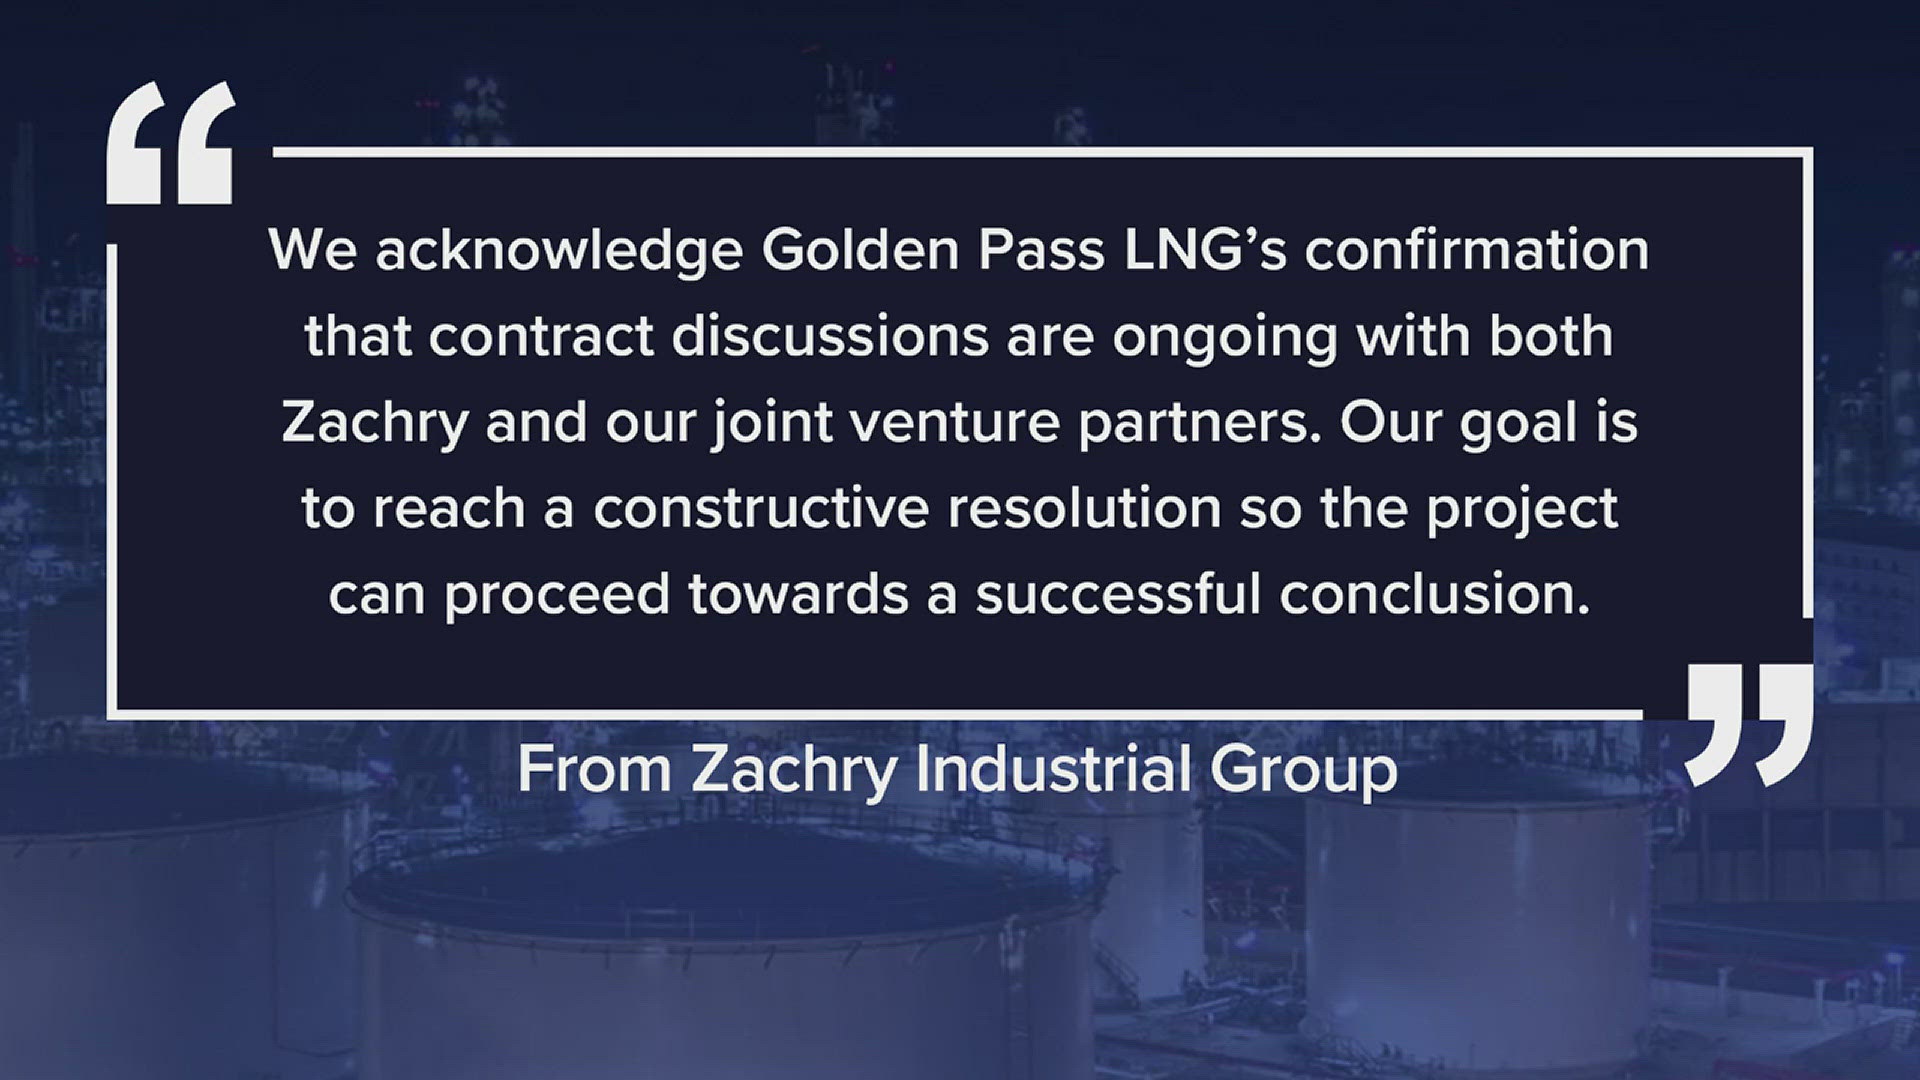 The company says the Golden Pass LNG project has "endured significant cost pressures."